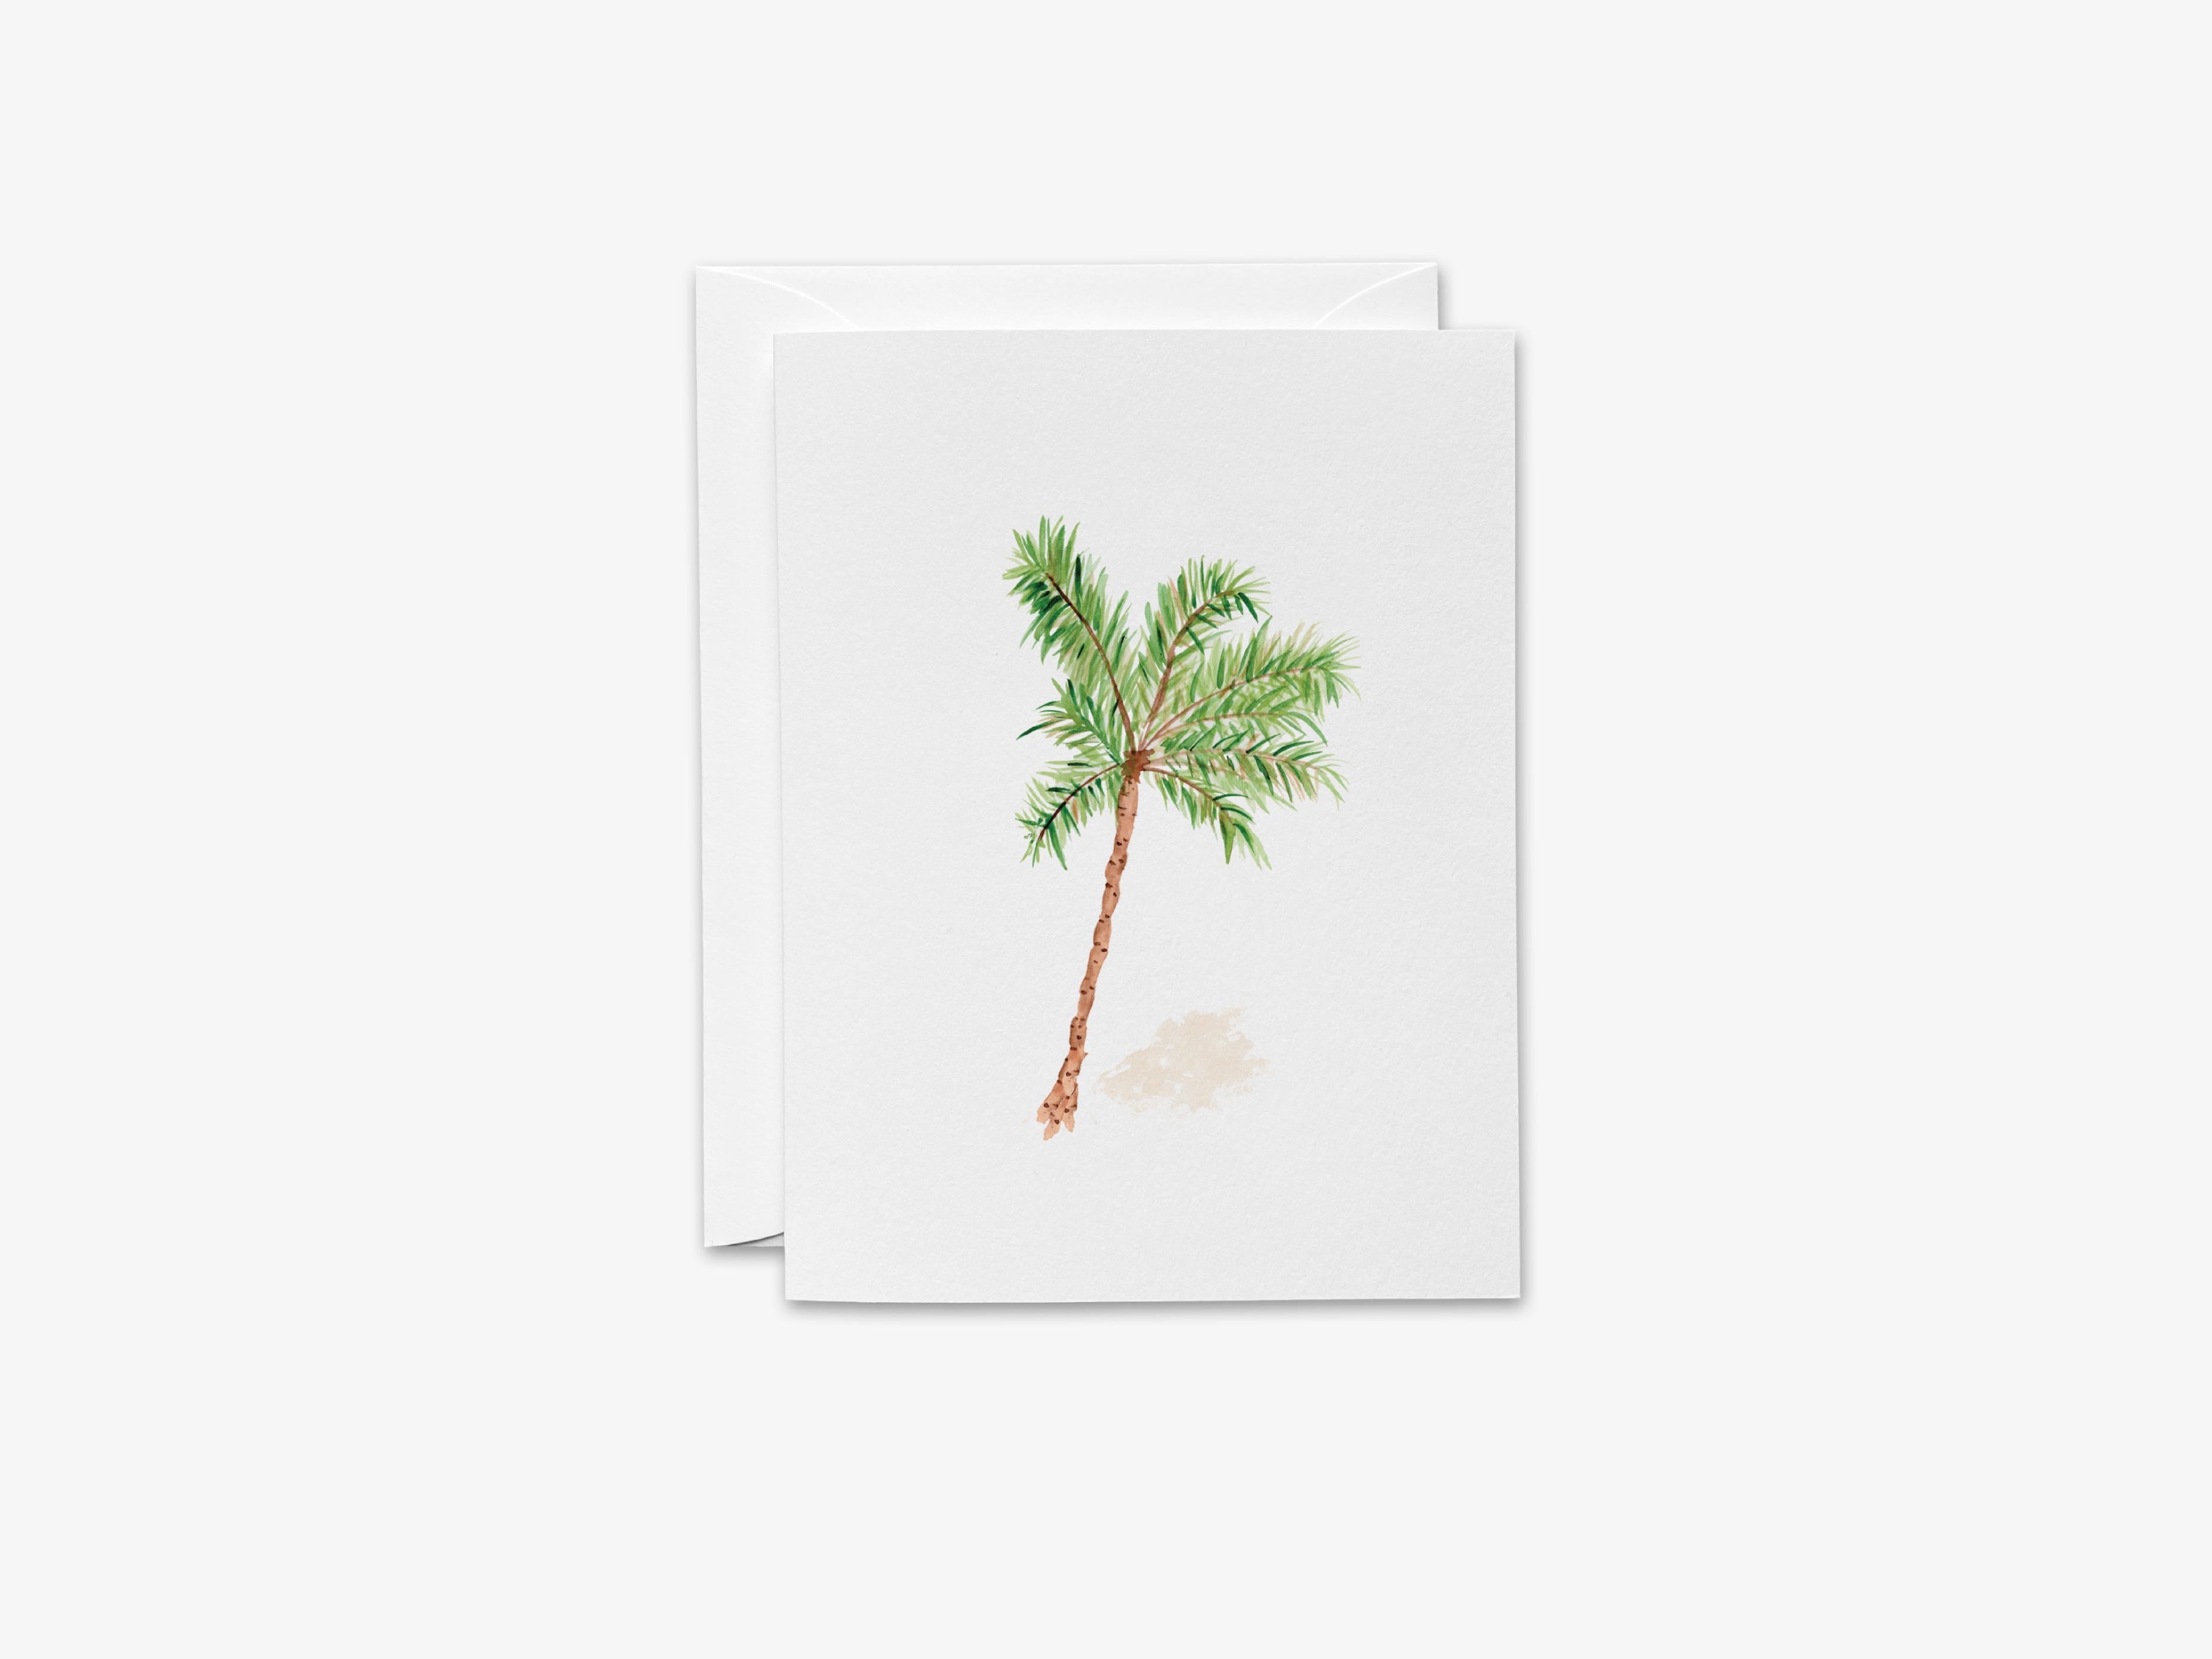 Palm Tree Greeting Card-These folded greeting cards are 4.25x5.5 and feature our hand-painted palm tree, printed in the USA on 100lb textured stock. They come with a White envelope and make a great thinking of you card for the beach lover in your life.-The Singing Little Bird